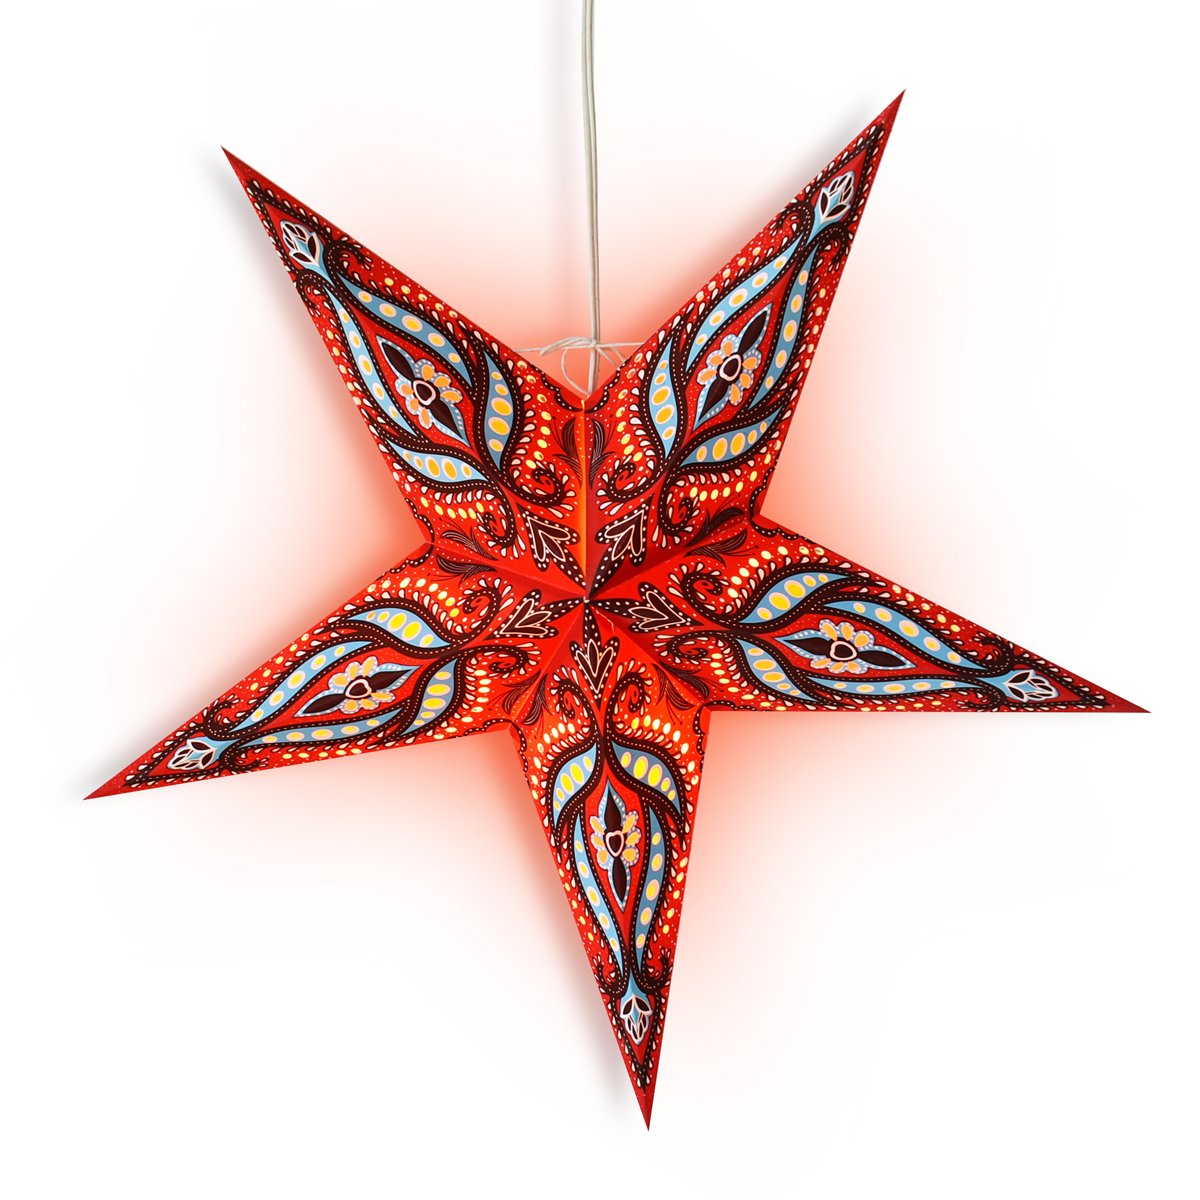 3-PACK + Cord | 24" Red / Black Bloom Paper Star Lantern and Lamp Cord Hanging Decoration - AsianImportStore.com - B2B Wholesale Lighting and Decor